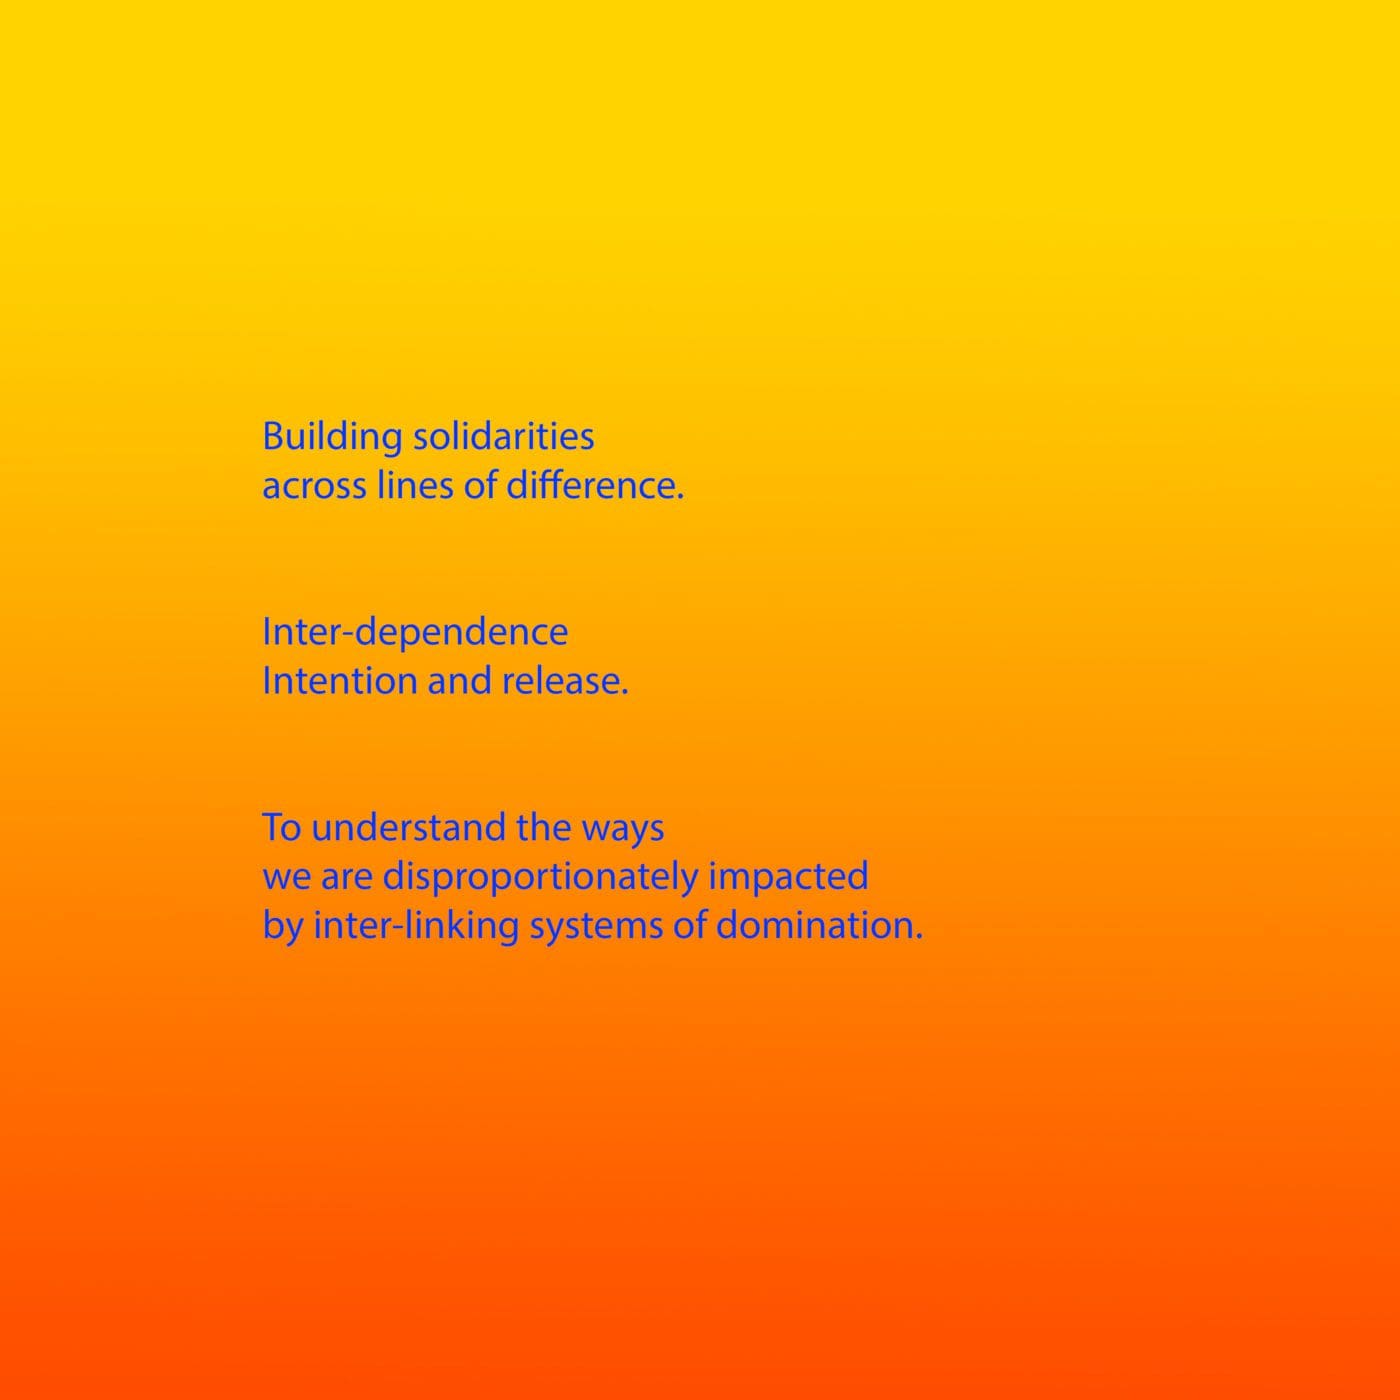 Bright blue text appears on a background that is a gradient from yellow, through orange to red. The text reads: Building solidarities across lines of difference. Inter-dependence Intention and release. To understand the ways we are disproportionately impacted by inter-linking systems of domination.